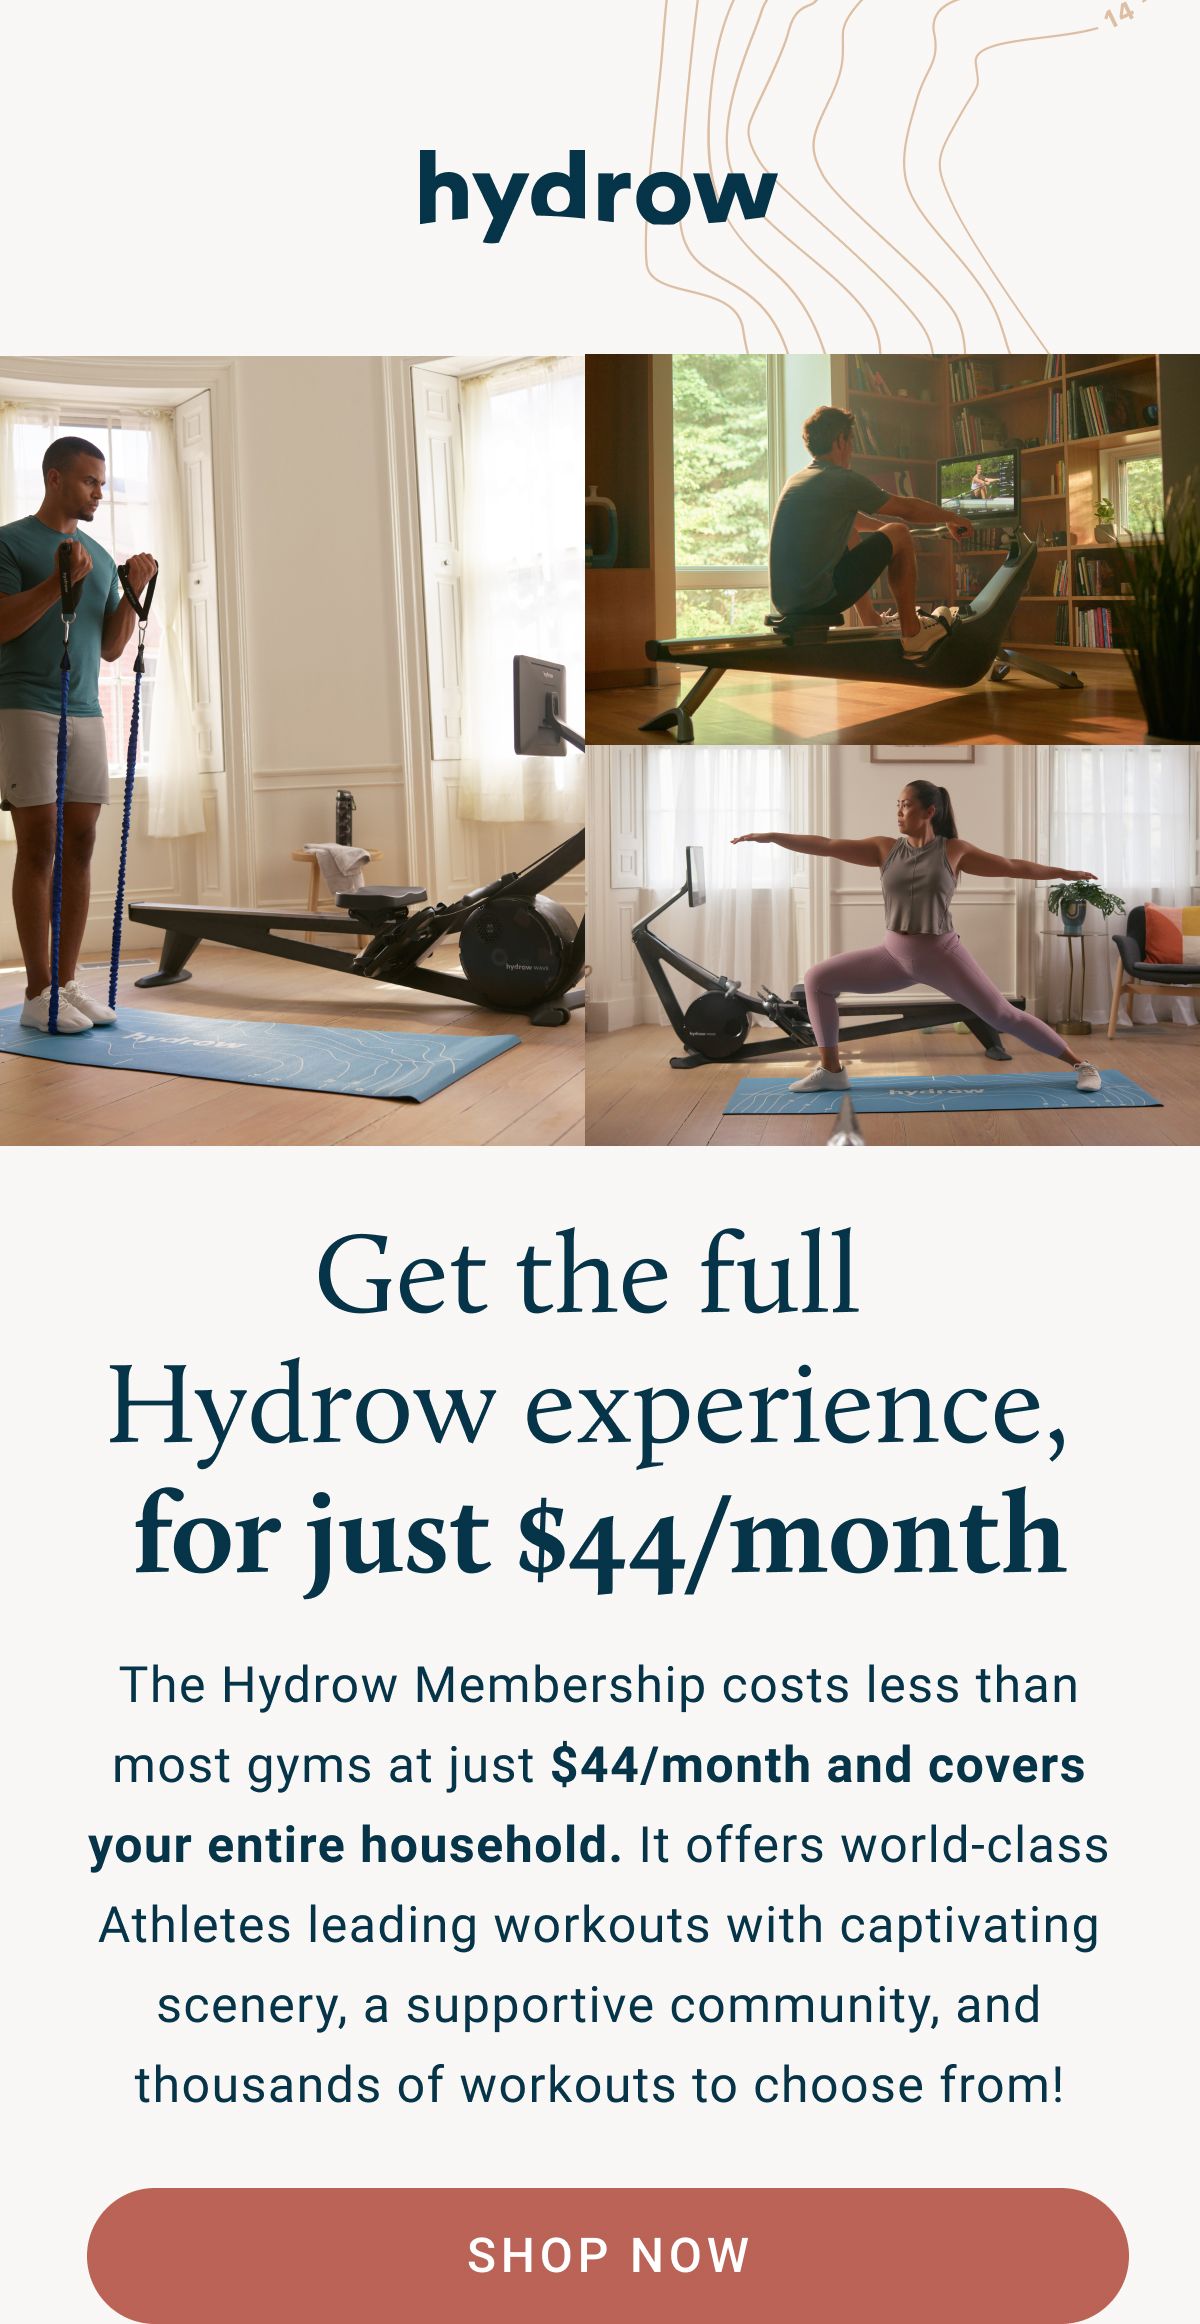 Get the full Hydrow experience, for just $44/month. The Hydrow Membership costs less than most gyms at just $44/month and covers your entire household. It offers world-class Athletes leading workouts with captivating scenery, a supportive community, and thousands of workouts to choose from!